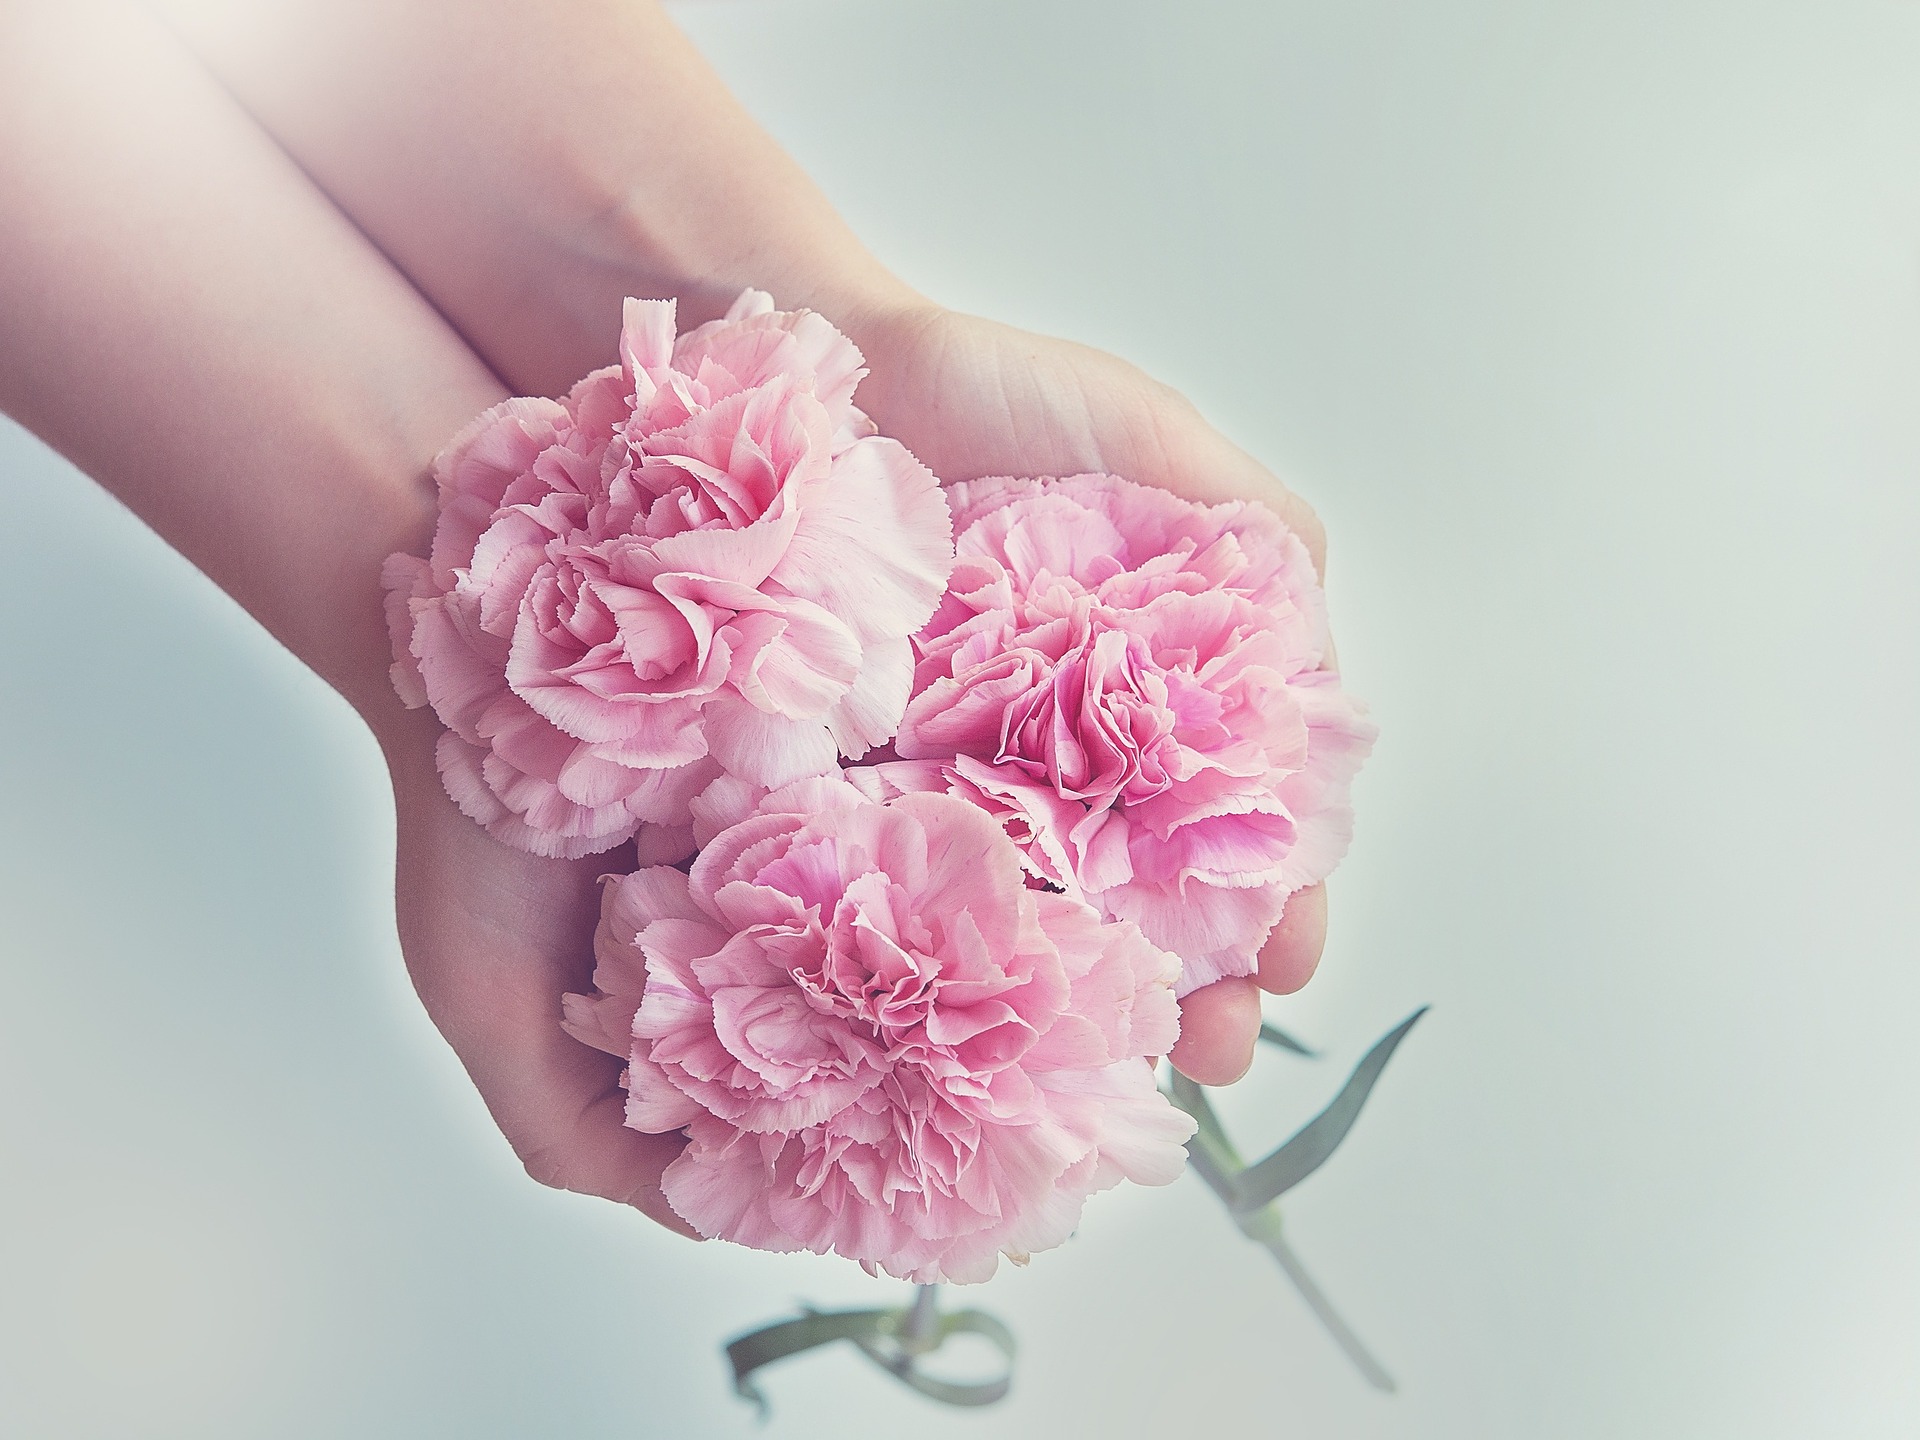 Two hands hold pink flowers in their palms.